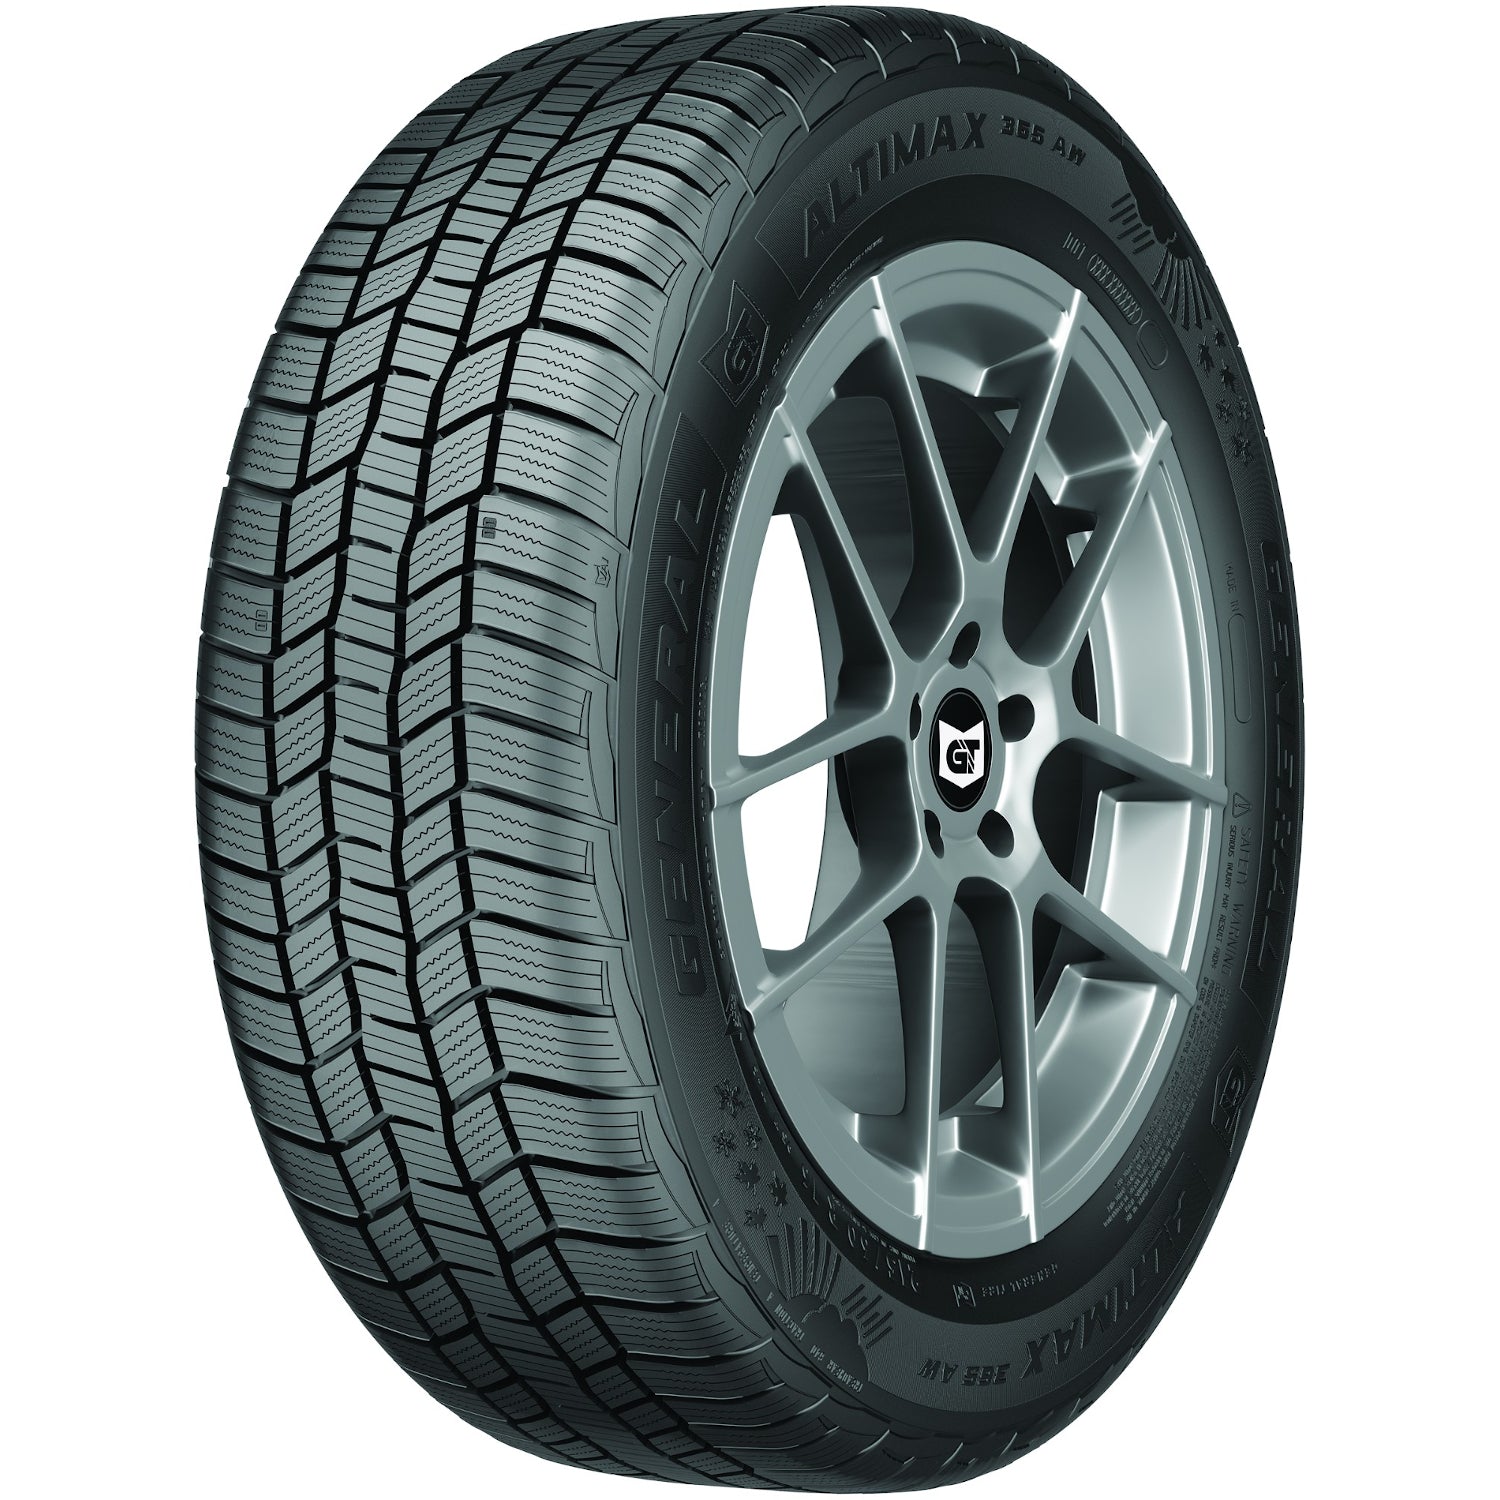 GENERAL ALTIMAX 365AW 225/60R18 (28.6X8.9R 18) Tires